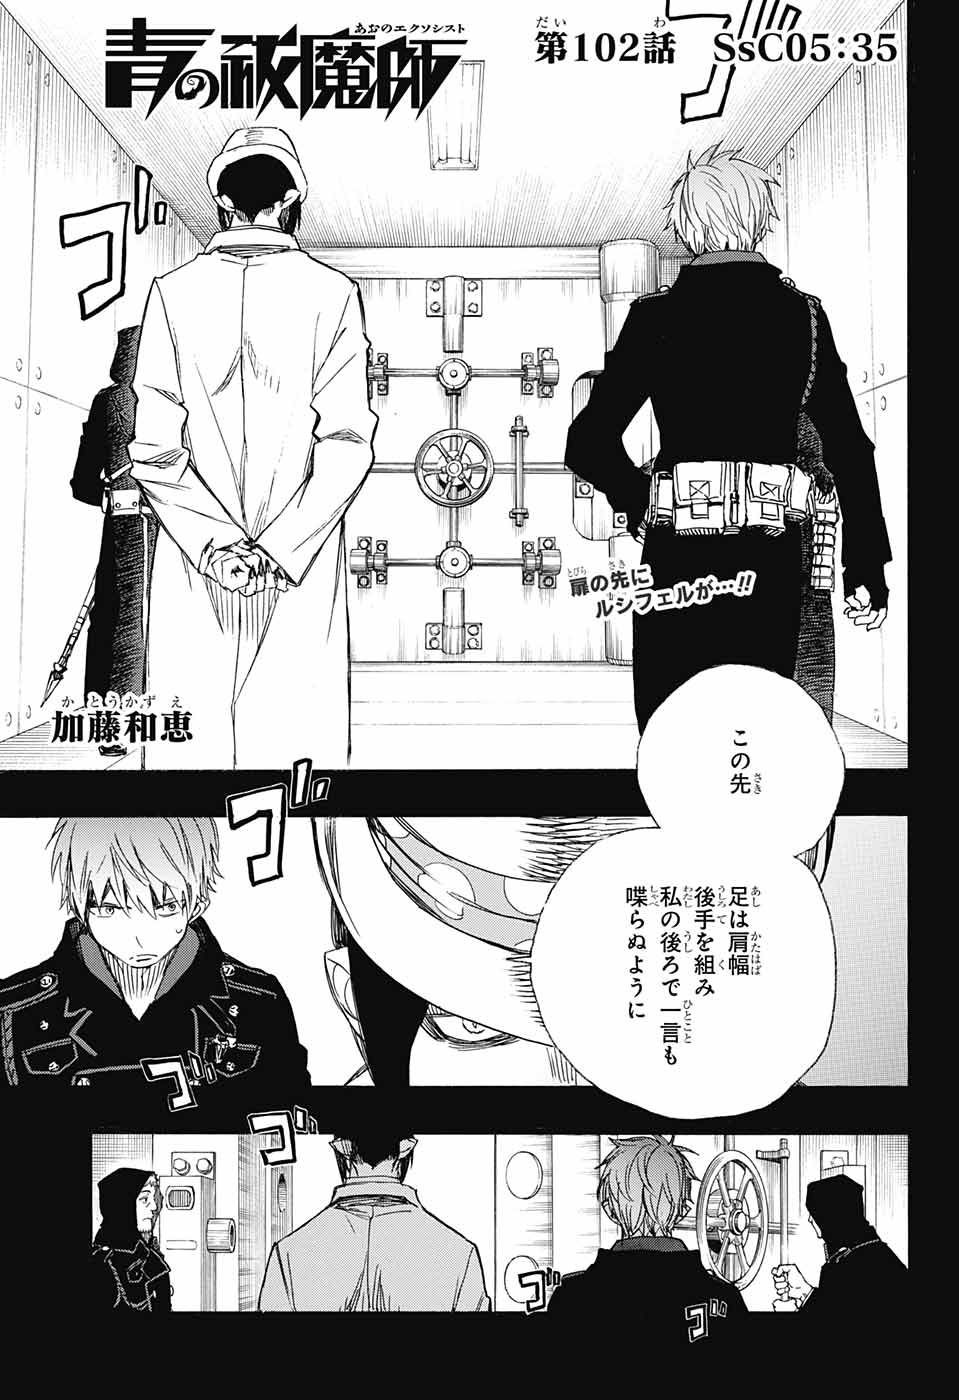 Ao no Exorcist - Chapter 102 - Page 1